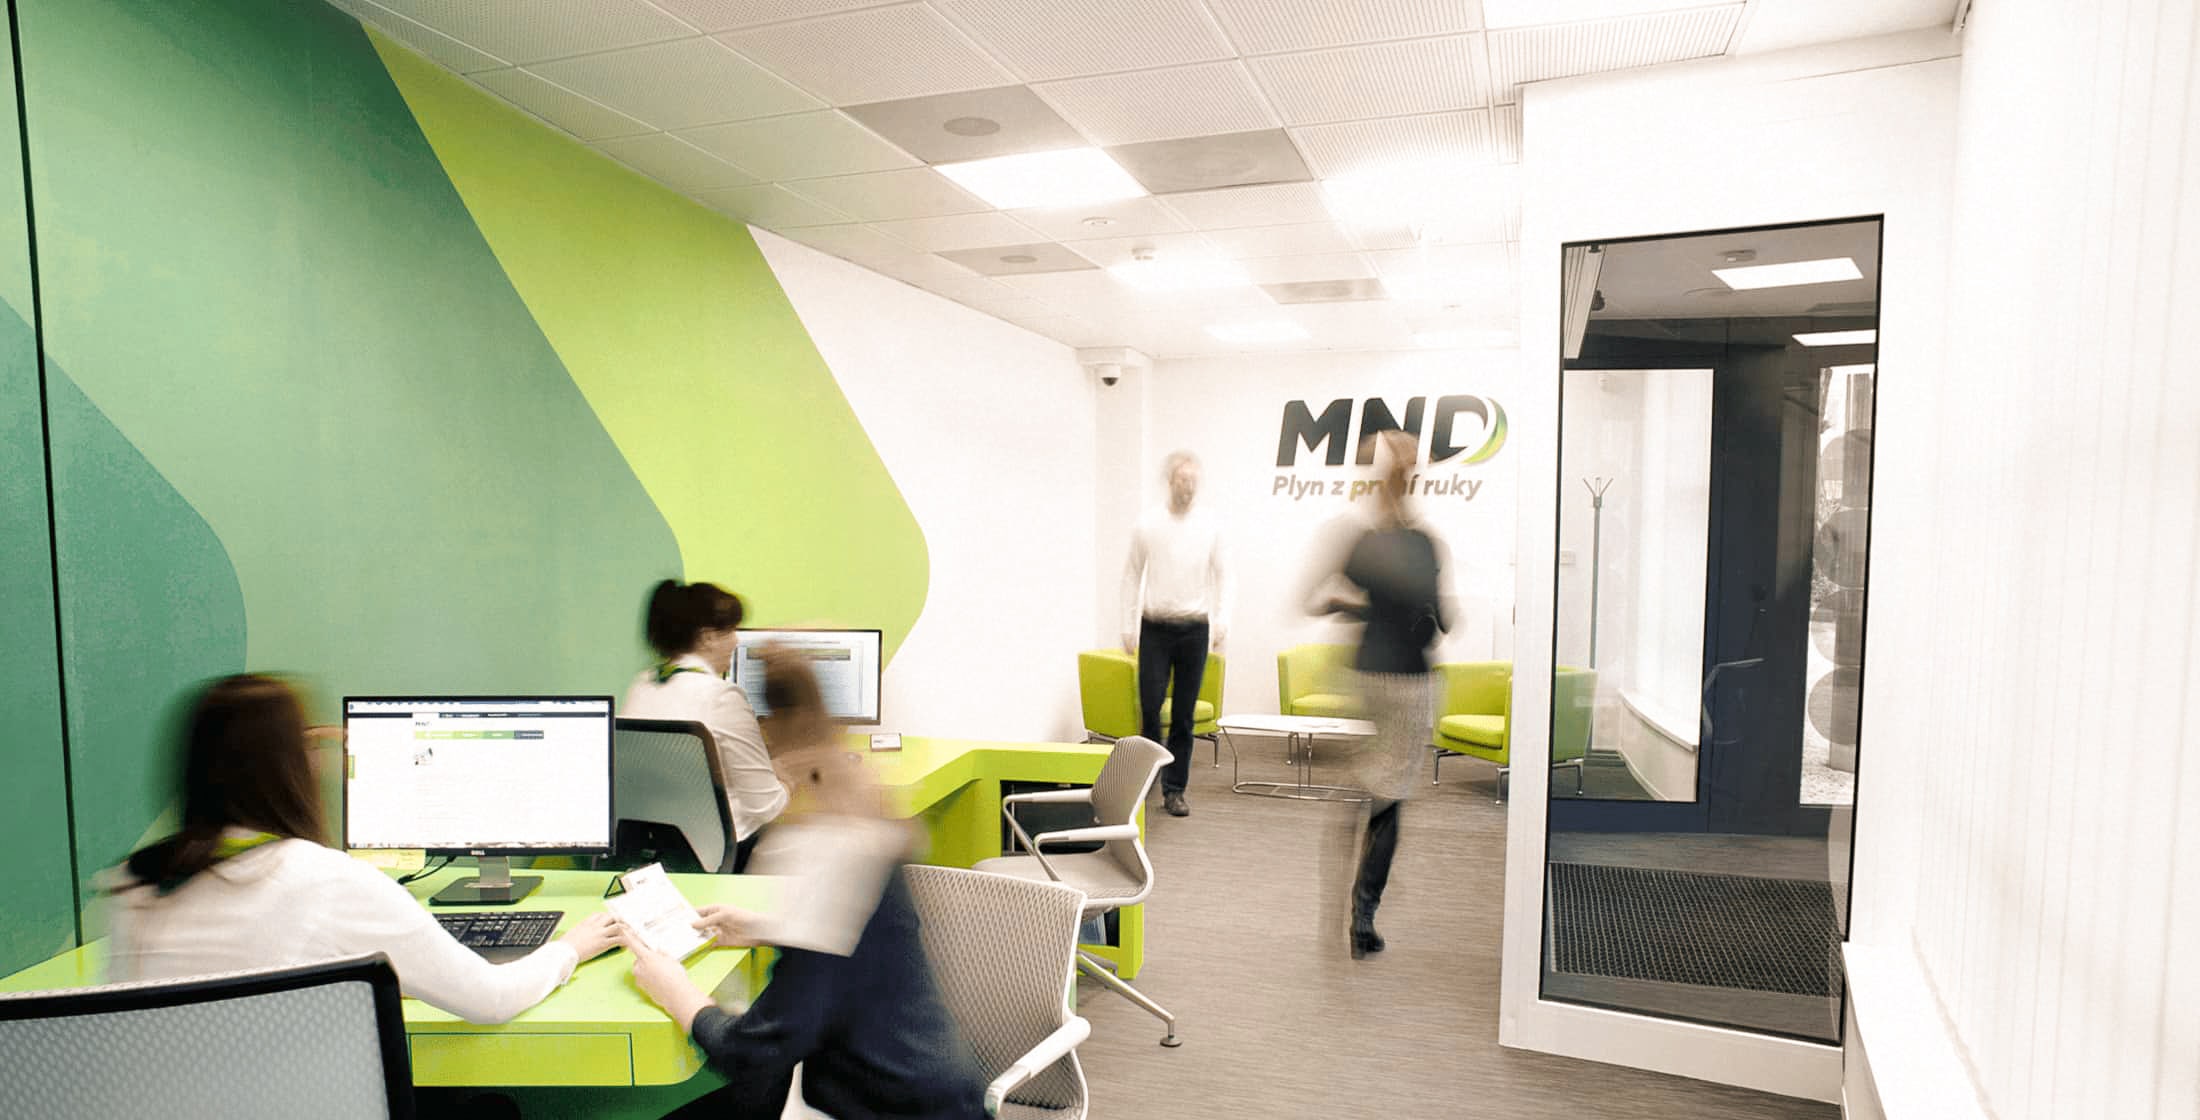 A quarter of a million customers receive energy from MND